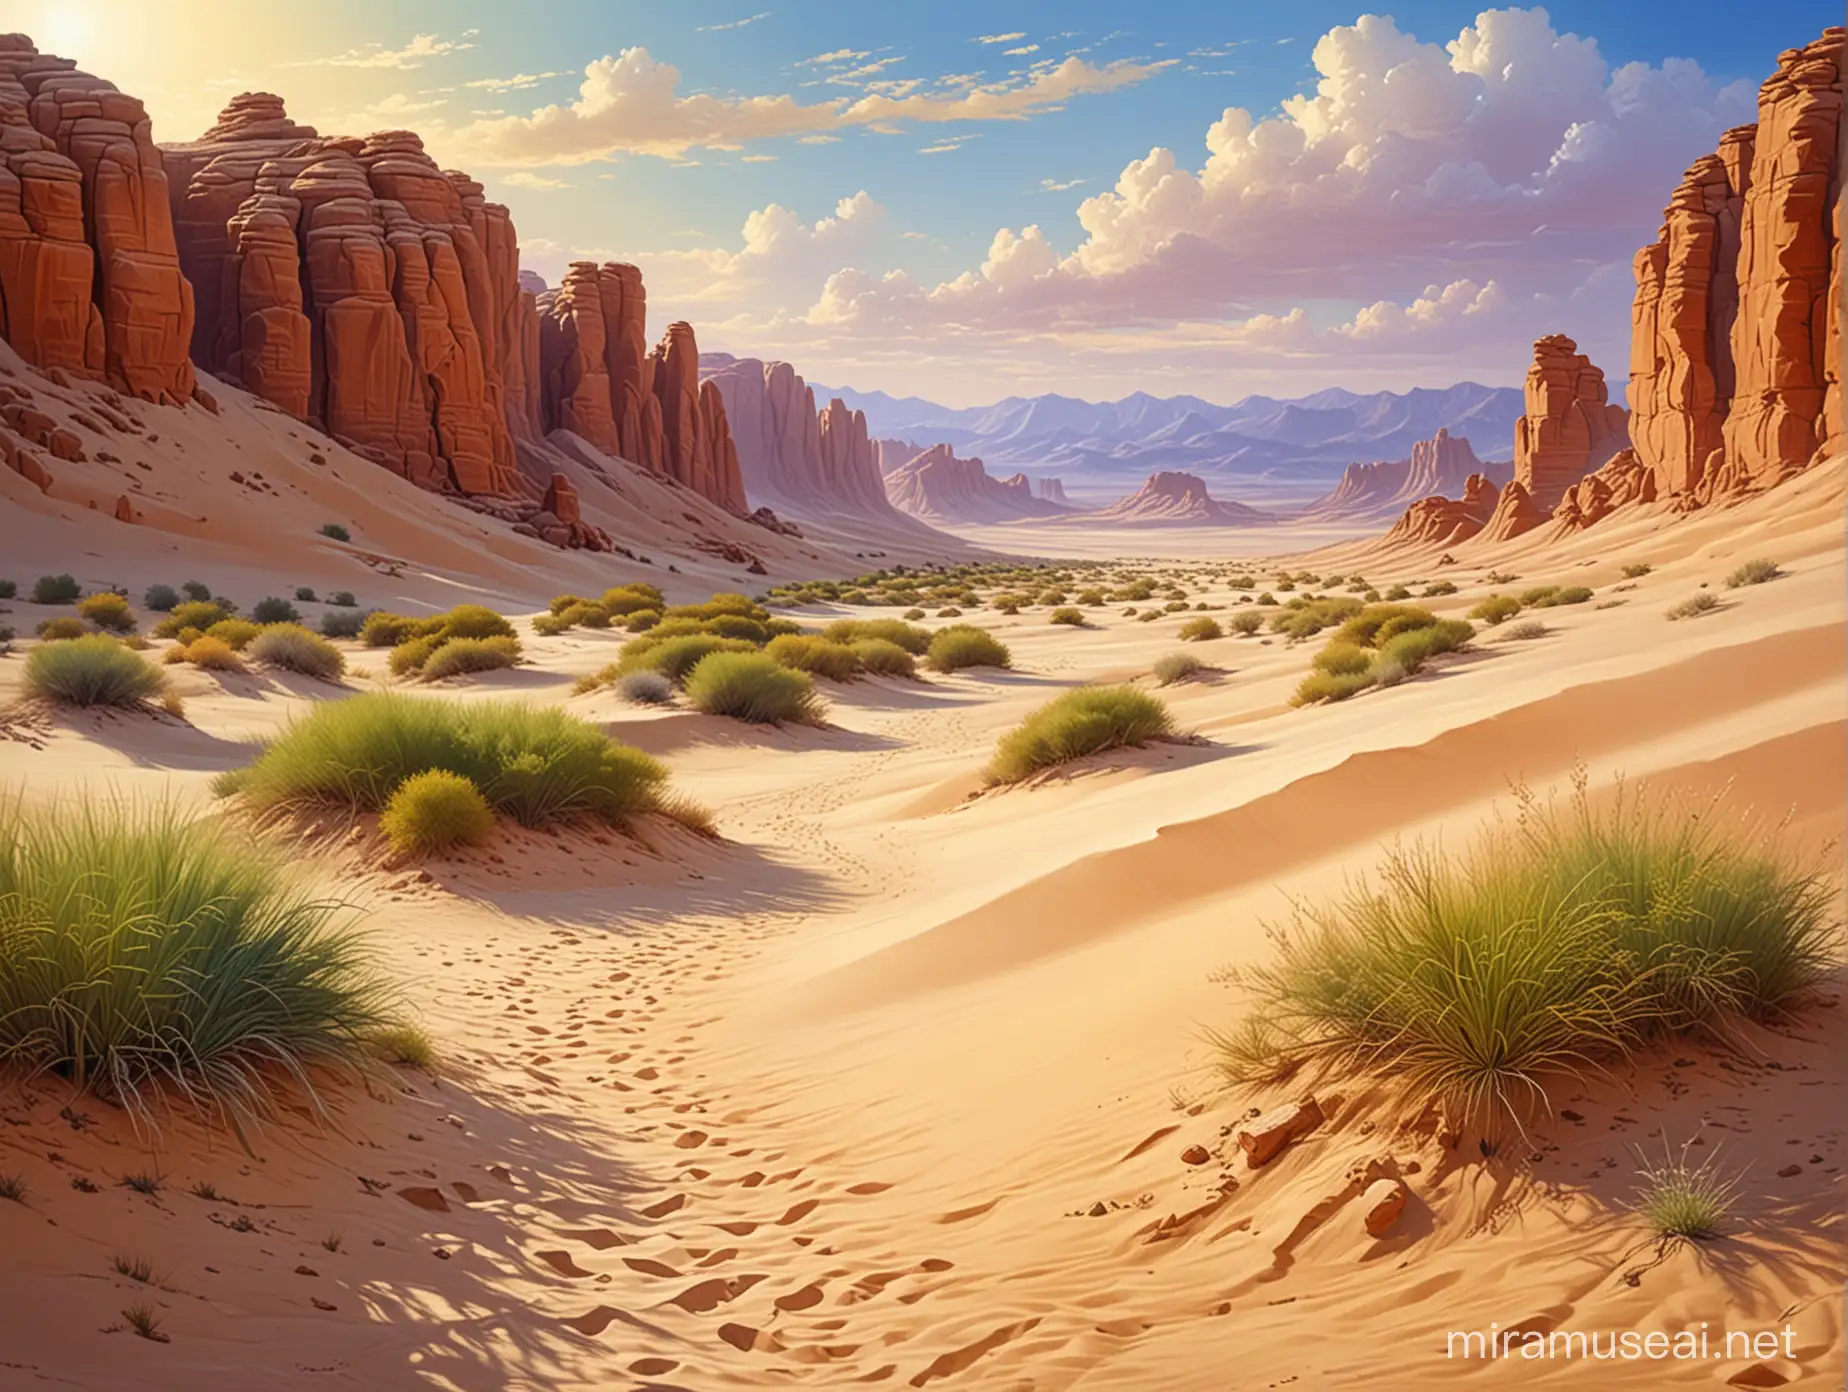 Vivid Desert Landscape with Oasis Professional Realistic Oil Painting Masterpiece